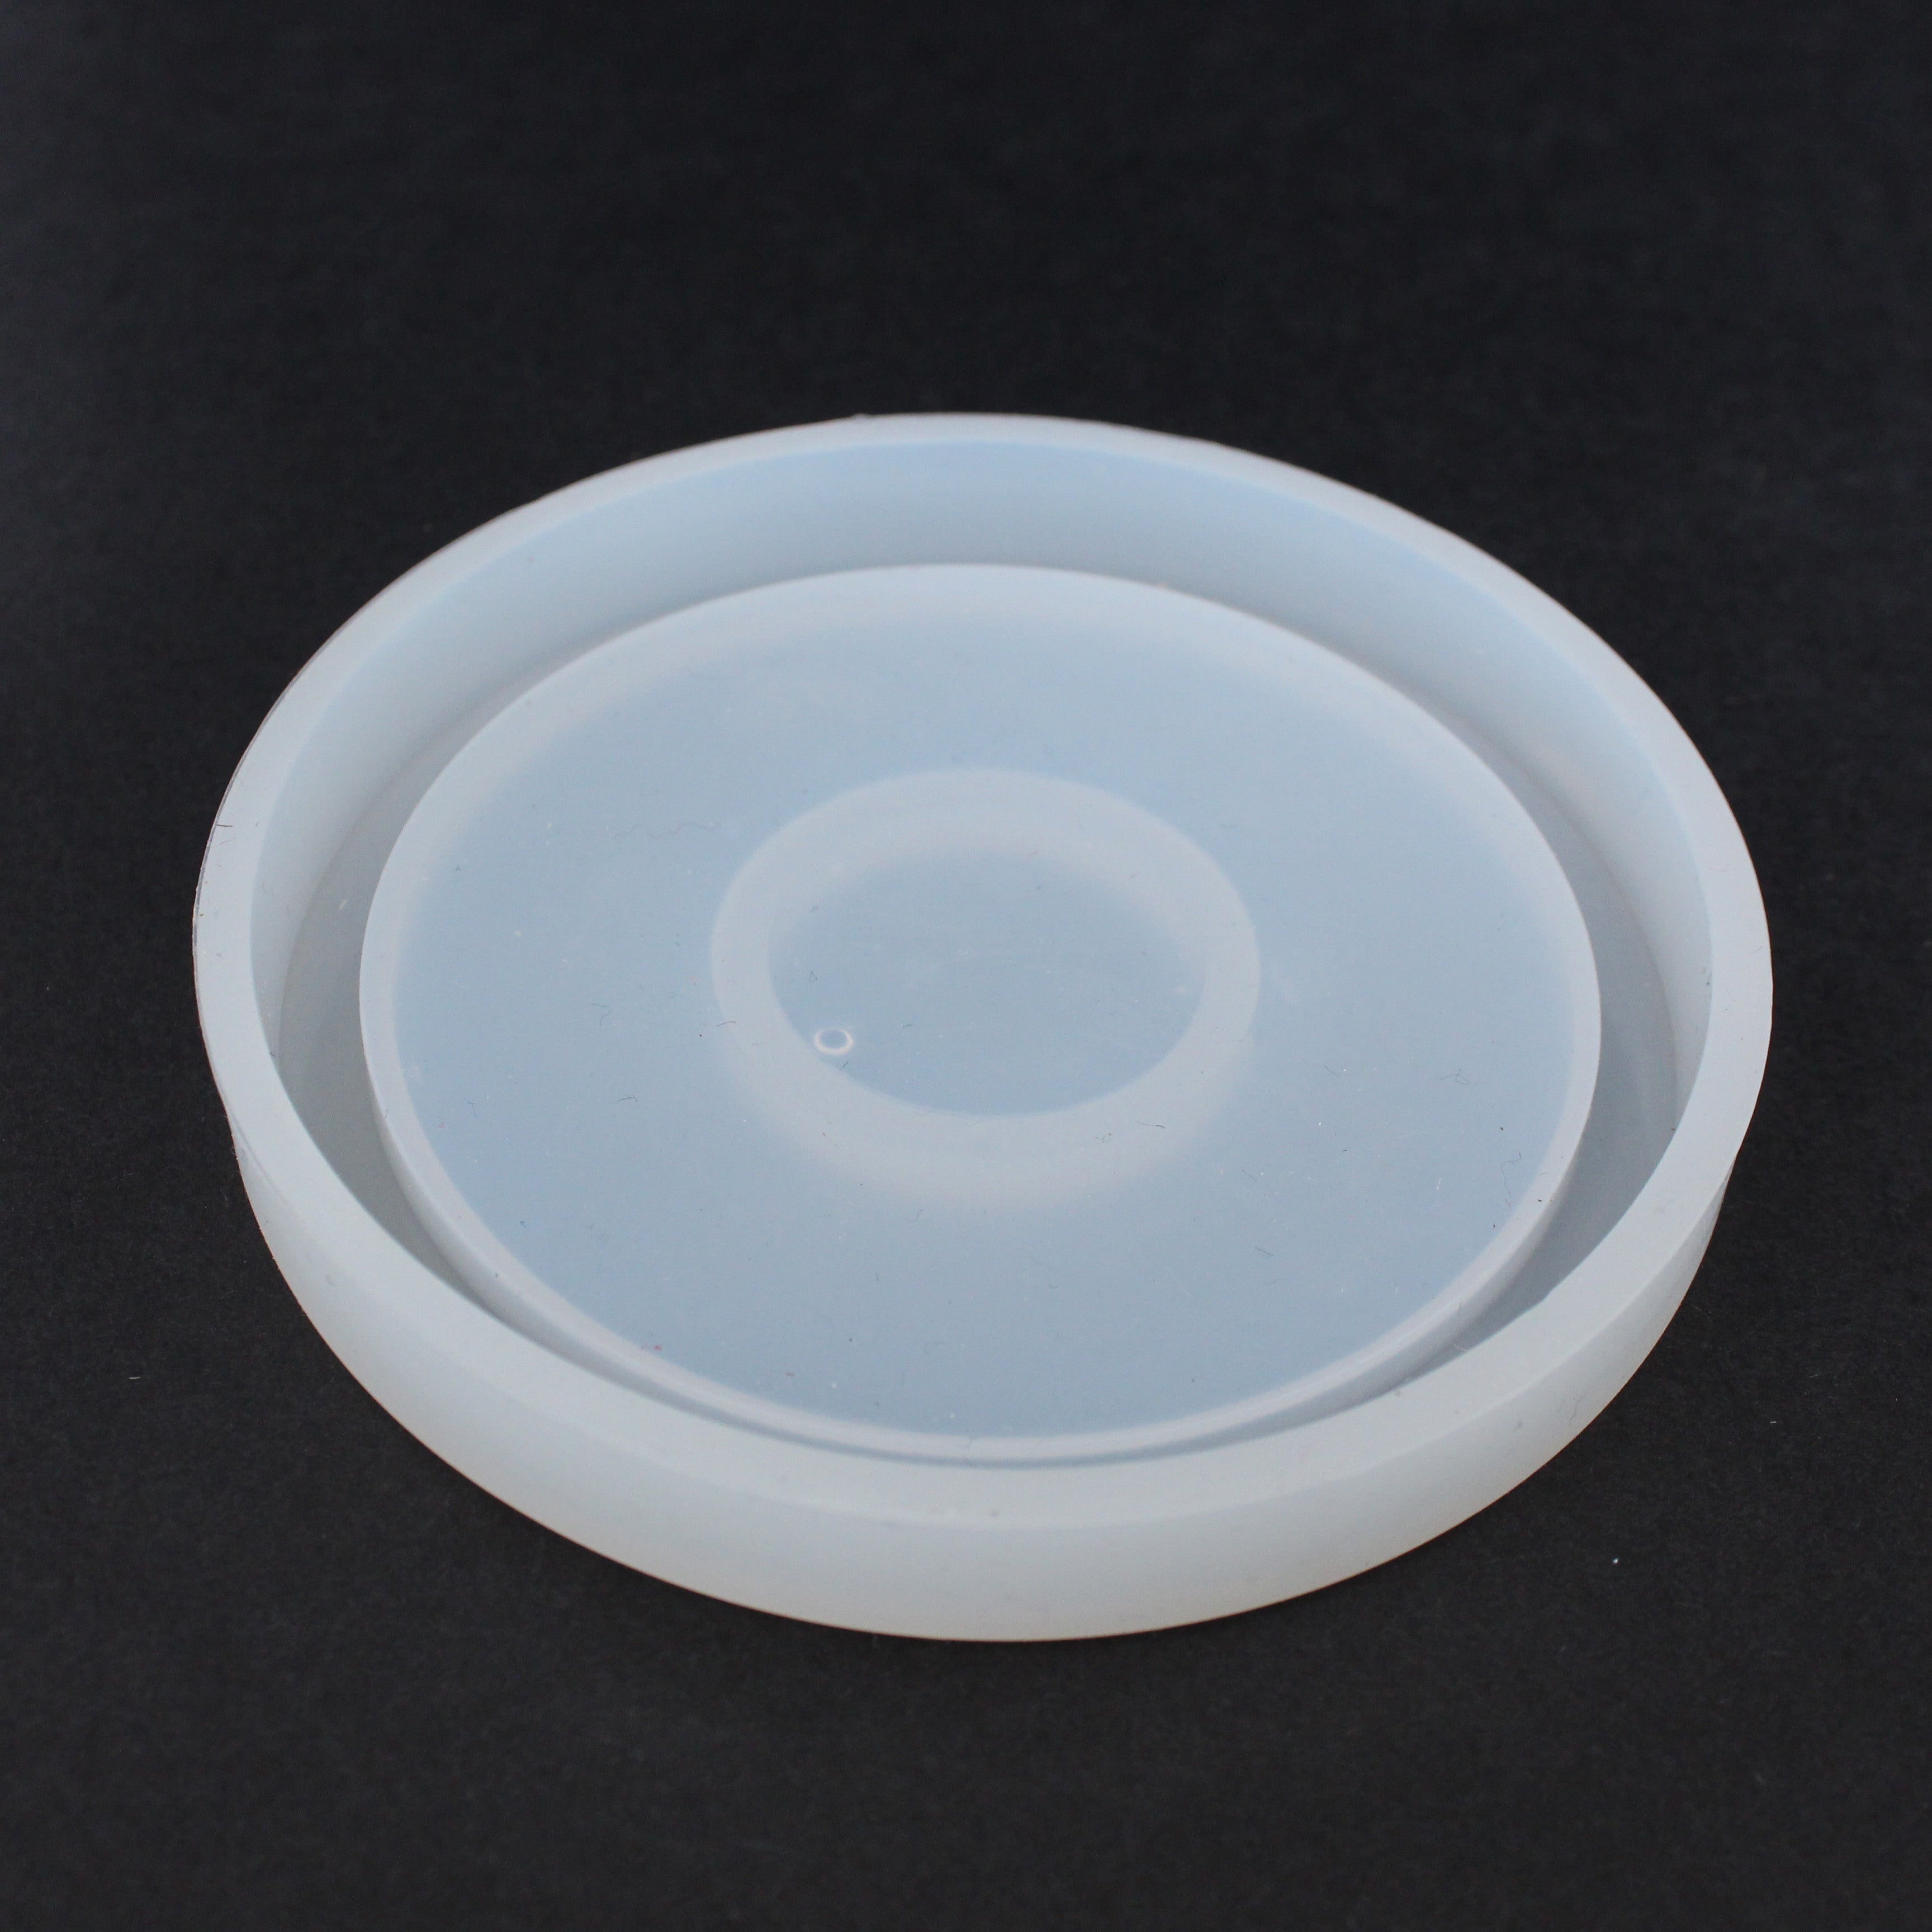 Resin Silicone Mould Broad Ring 8.5cm X 1.4cm 1pc